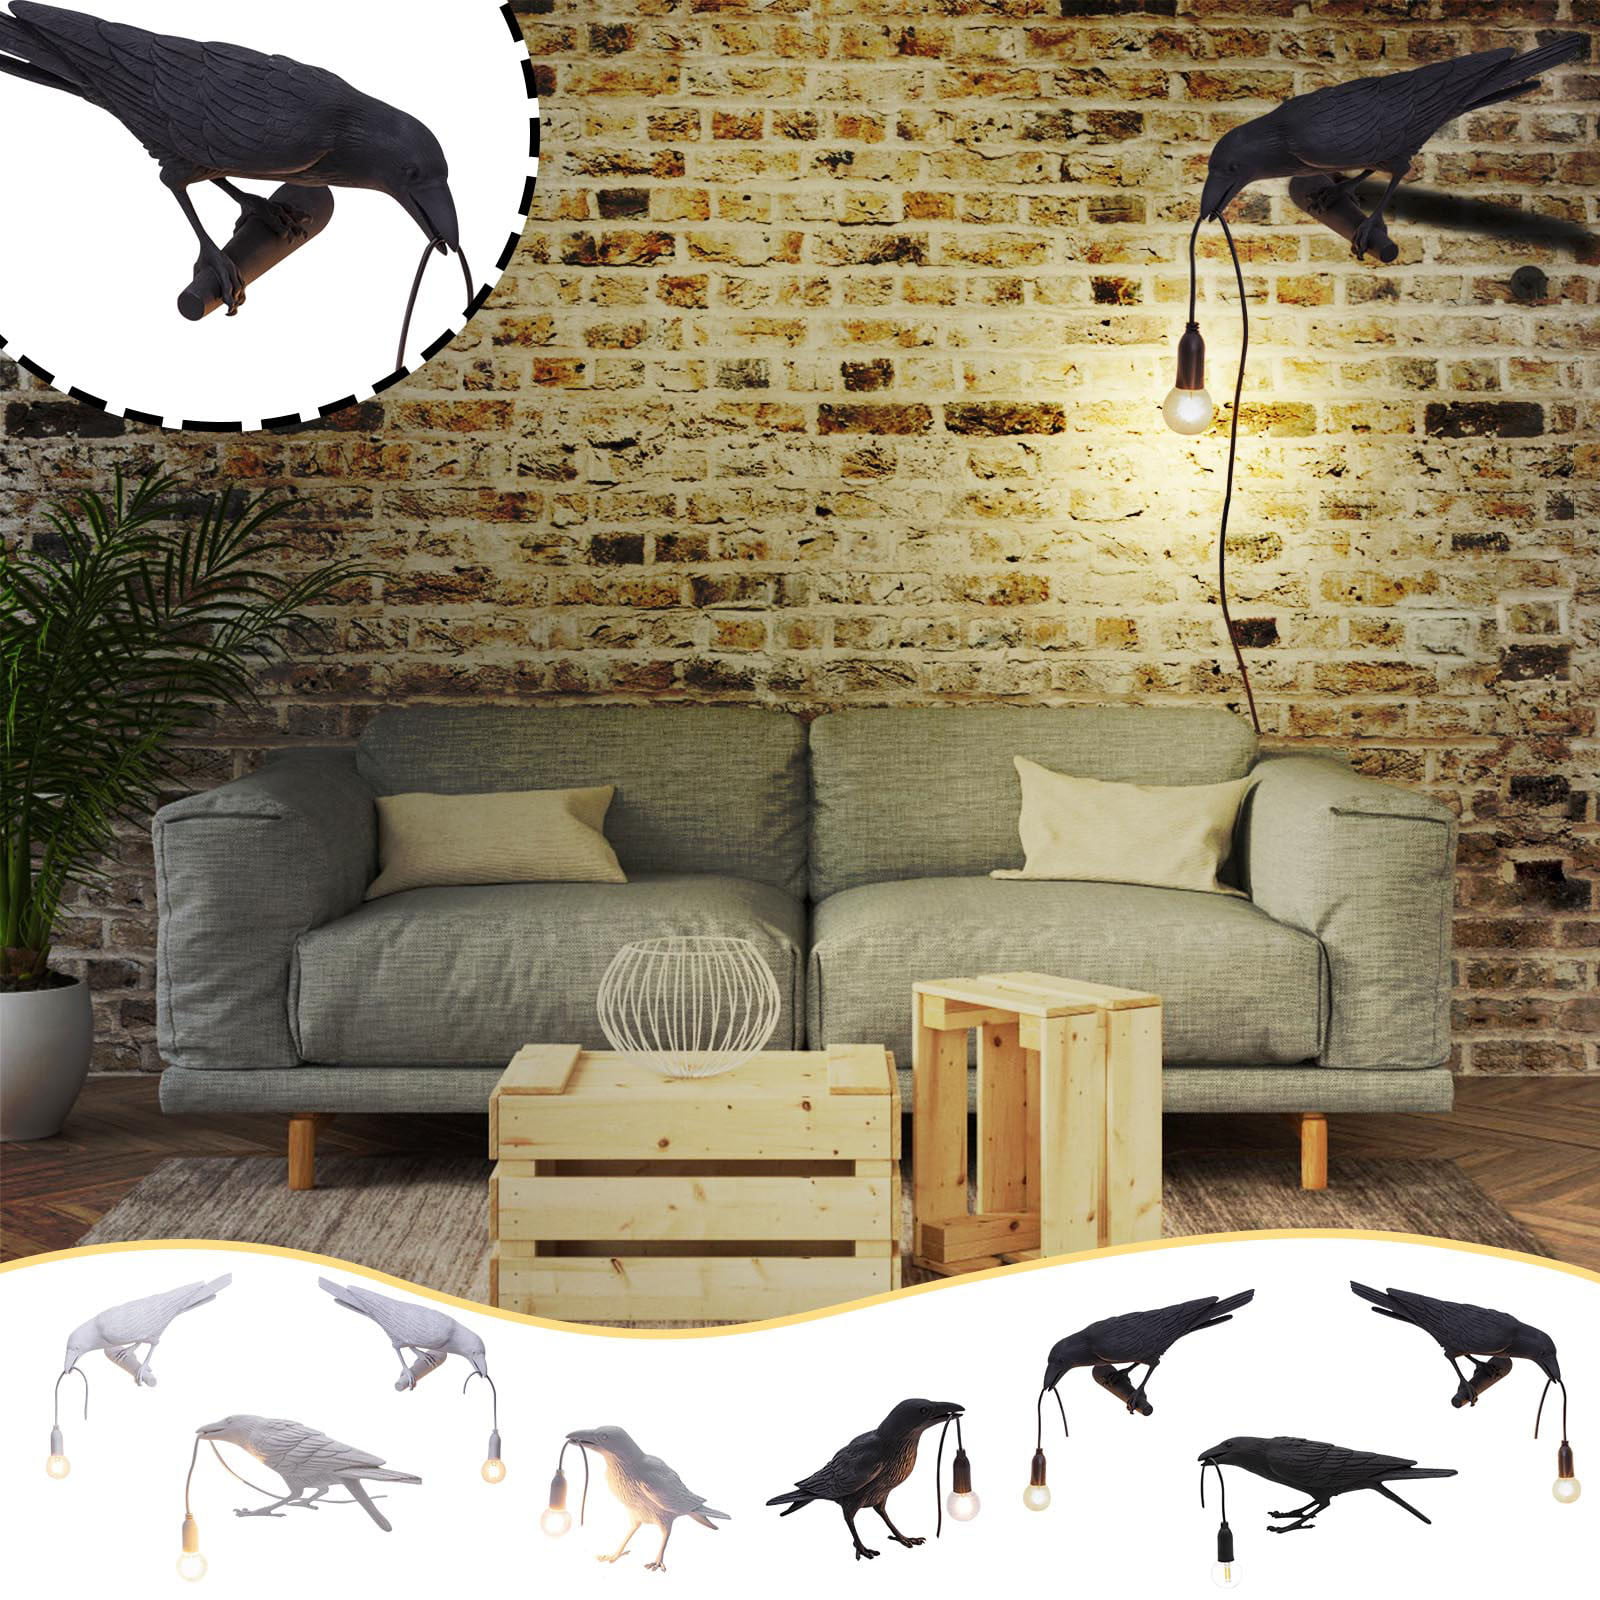 Details about   LamQee Table Lamp Crow Bird Desk LED E14 Bulb Wall Sconce Light Bedroom Decor 